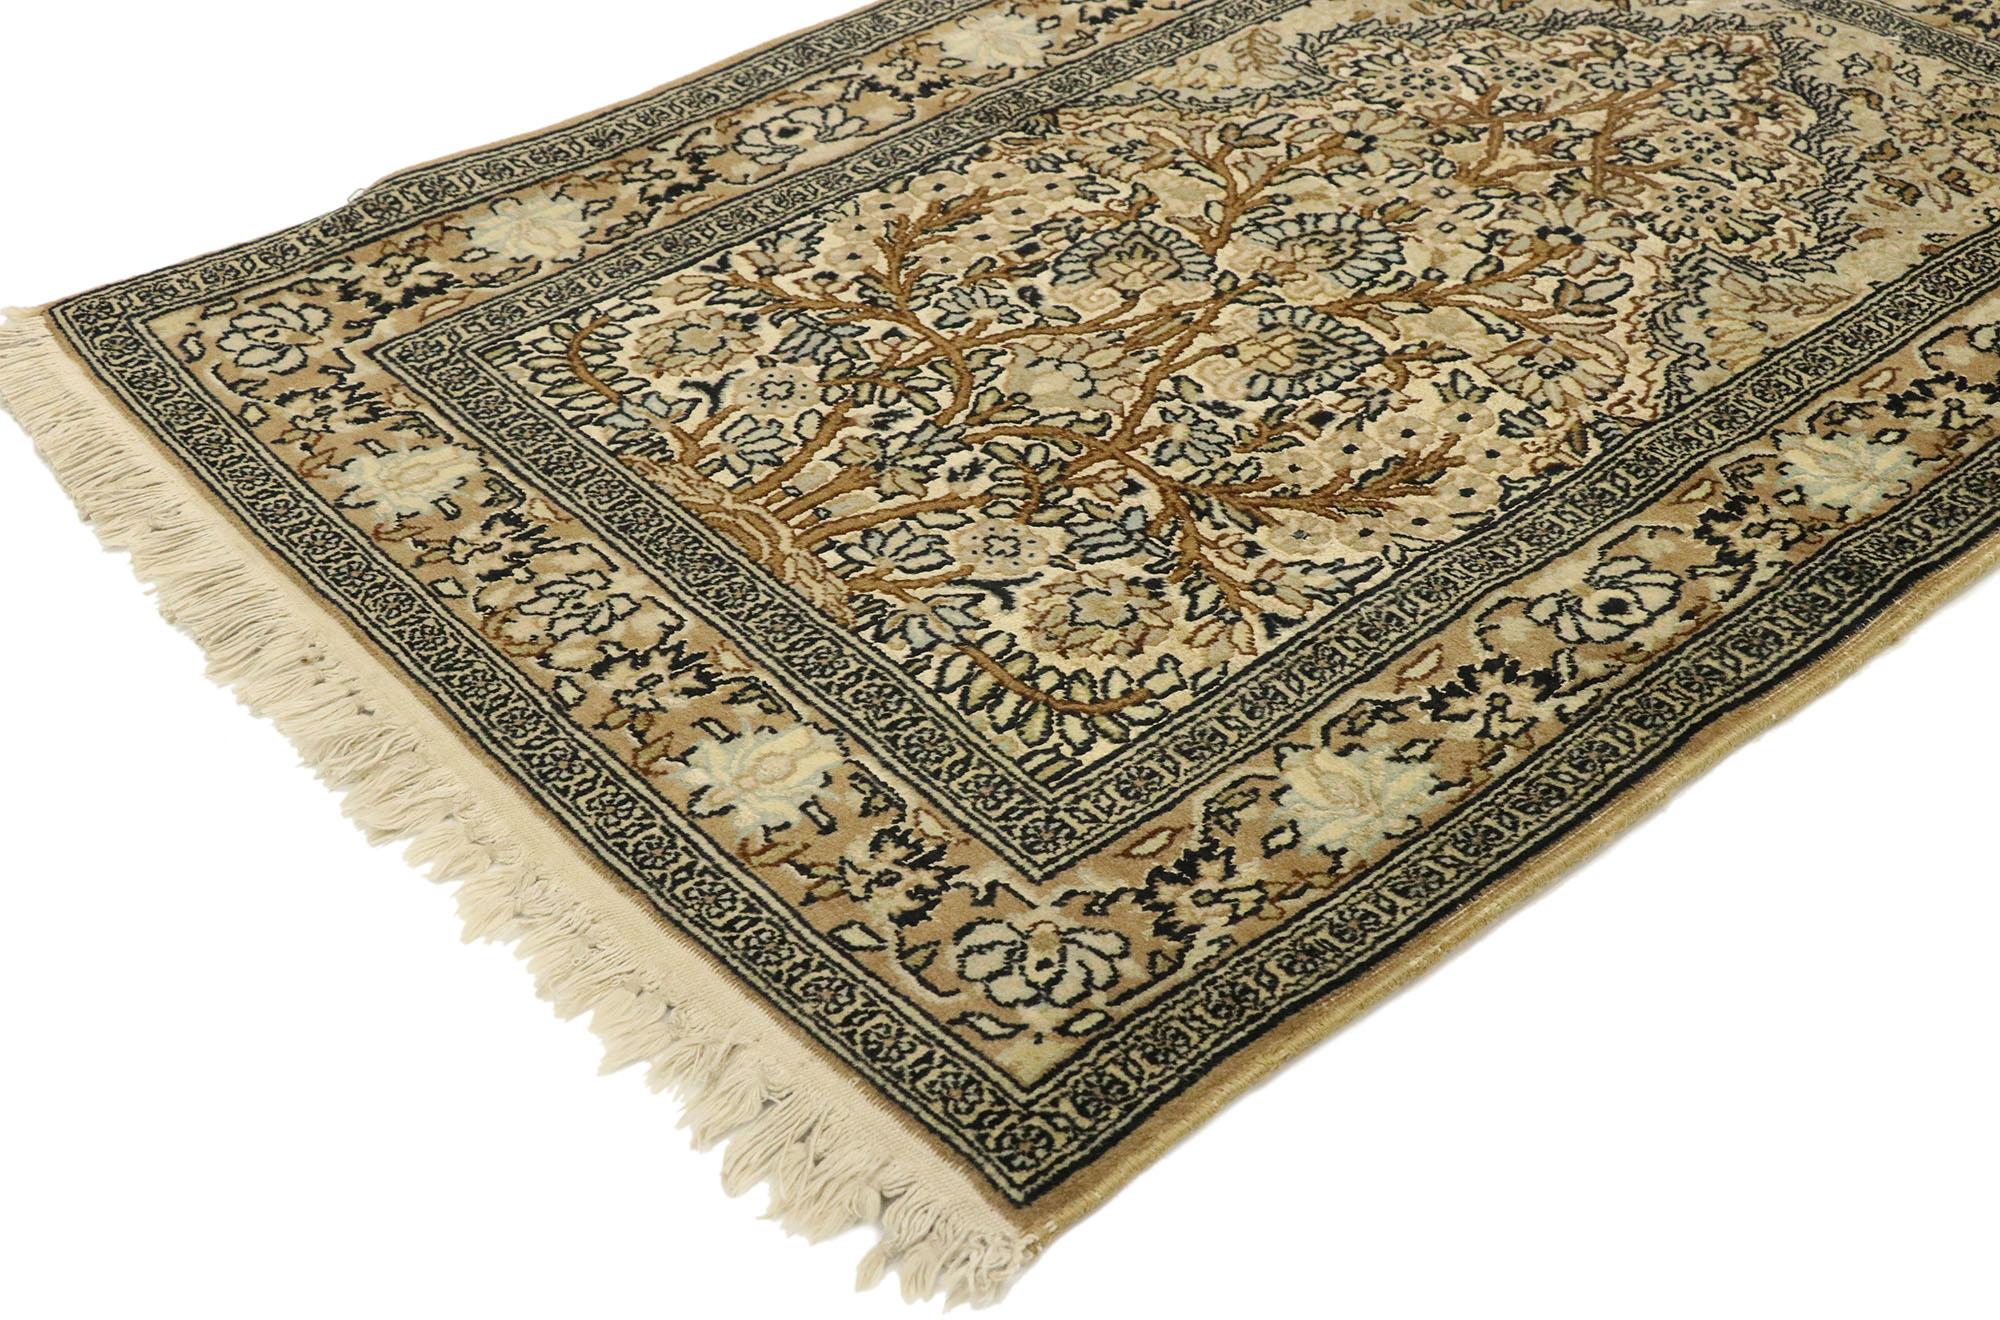 74453, vintage Pakistani Persian style Prayer rug with Directional layout design. Give the look of woven wonders and decorative elegance with this hand knotted wool vintage Pakistani Persian style vase prayer rug. From the bottom, the three branches